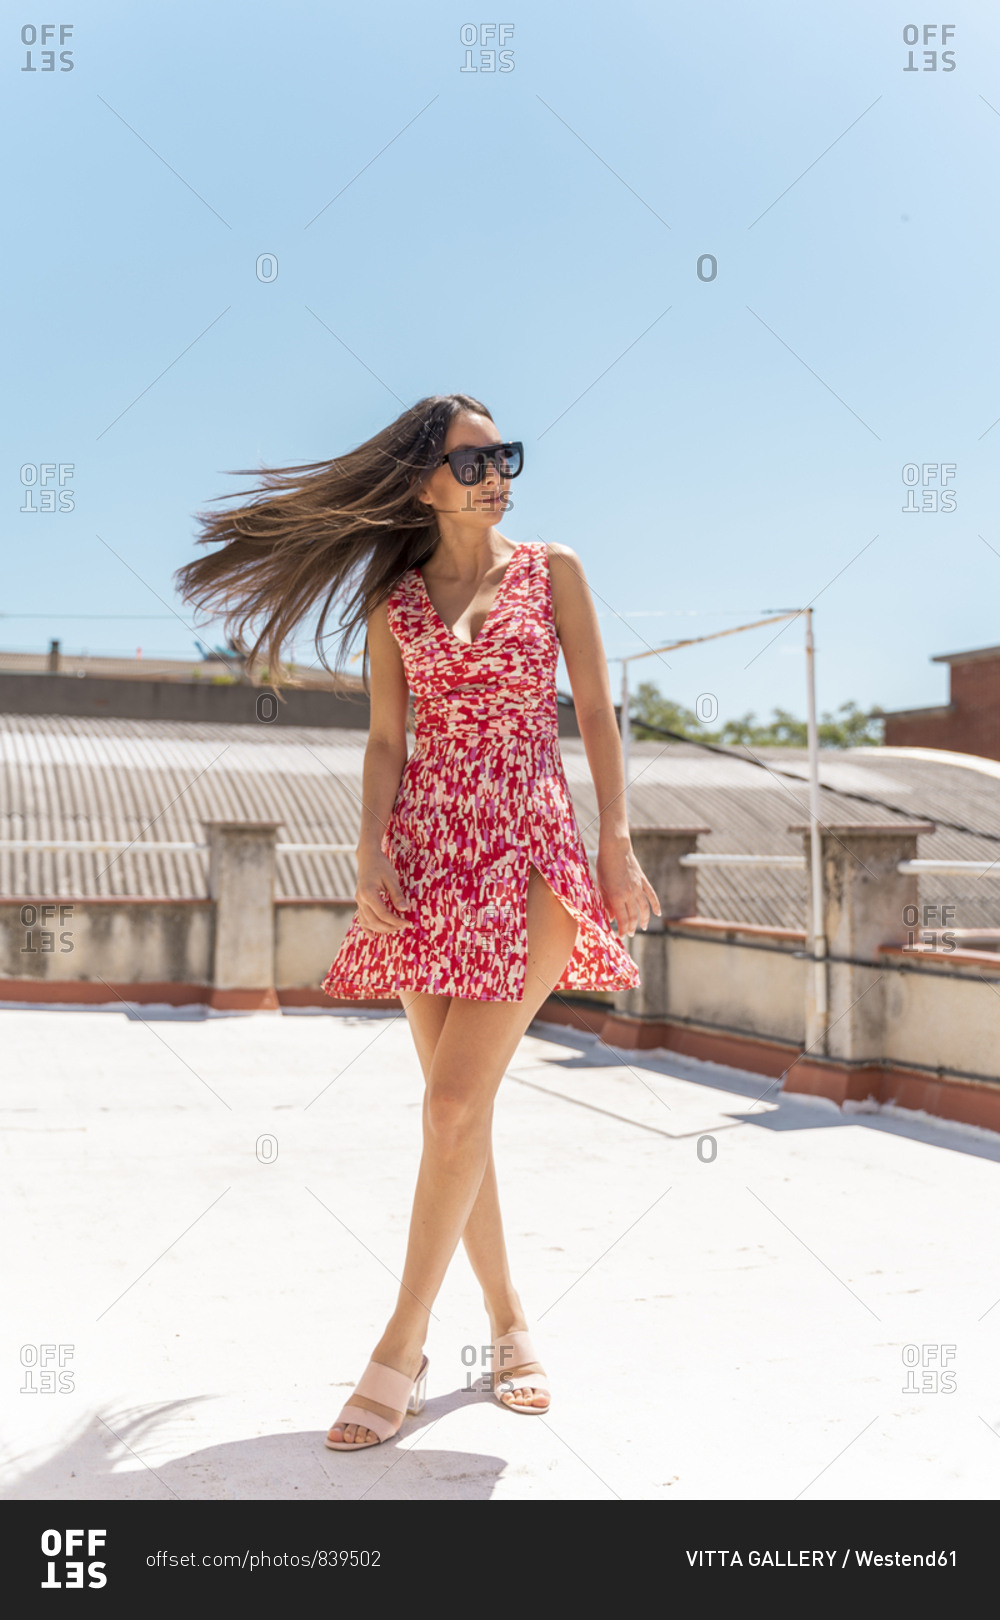 Portrait of young woman on roof top wearing fashionable summer dress tossing her hair